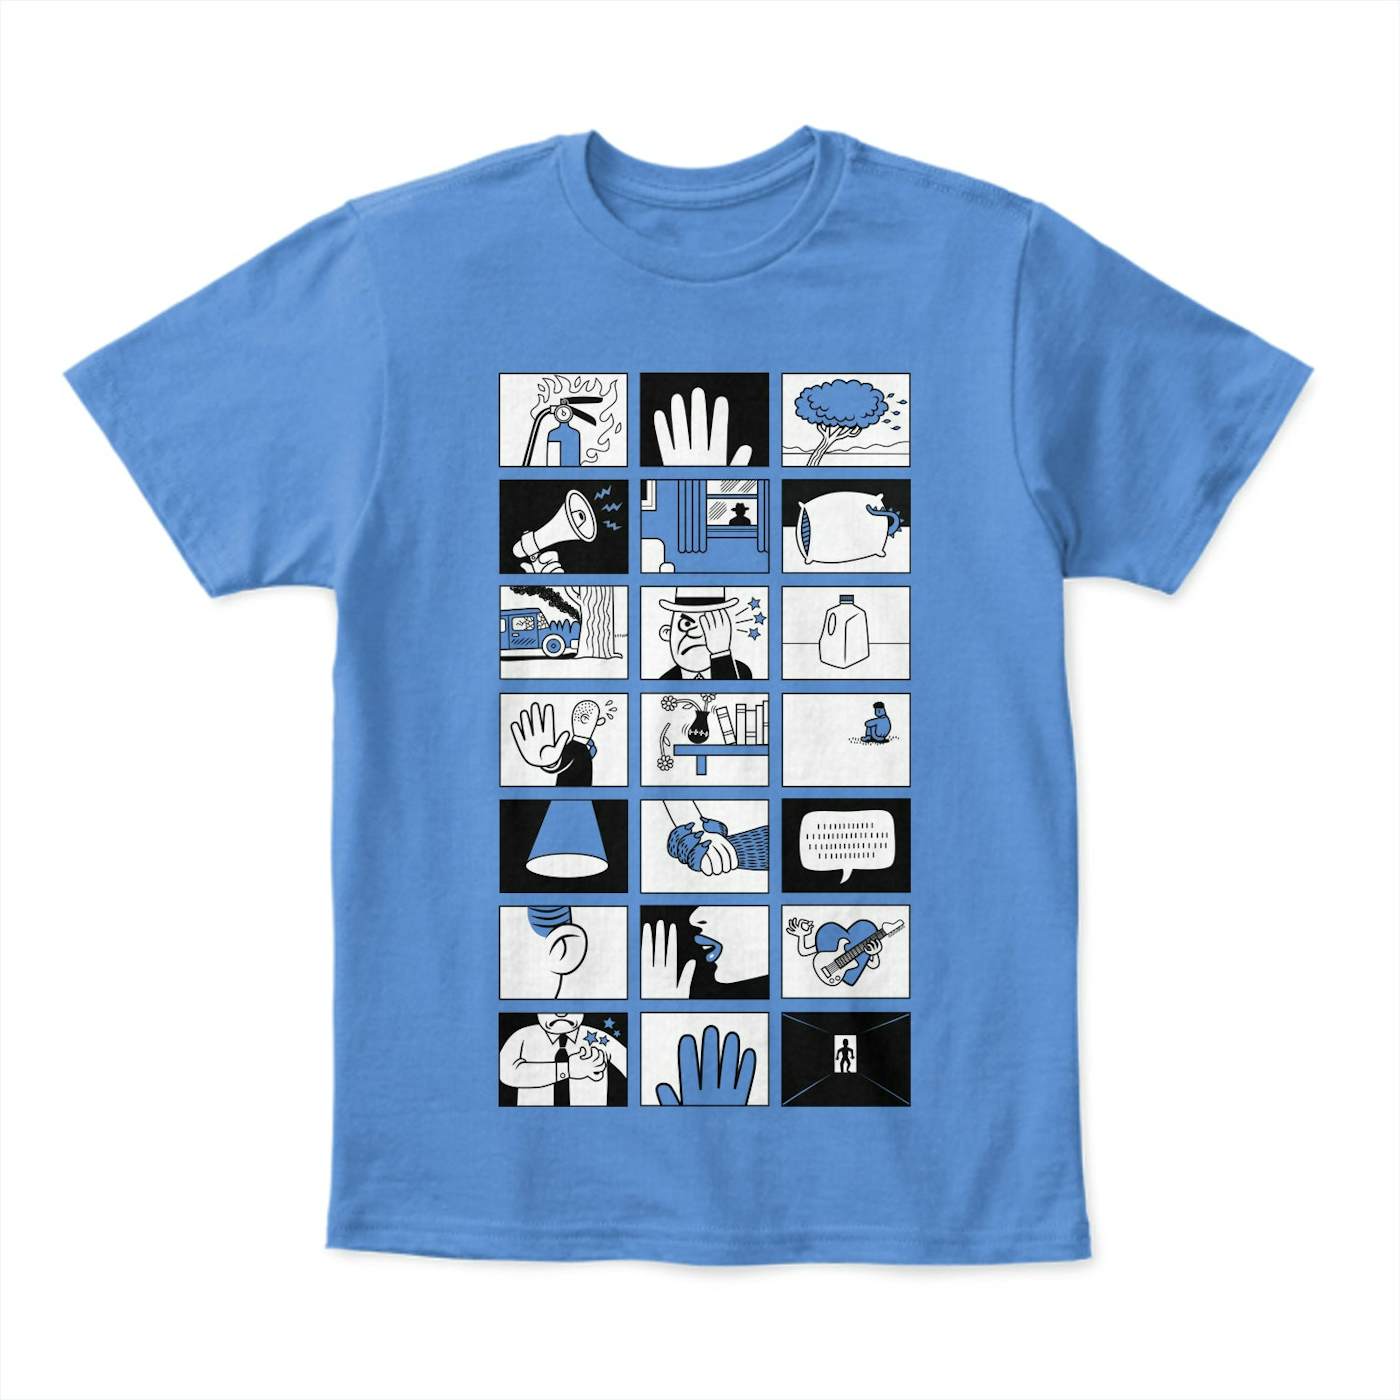 They Might Be Giants Fingertips on Blue (Unisex)